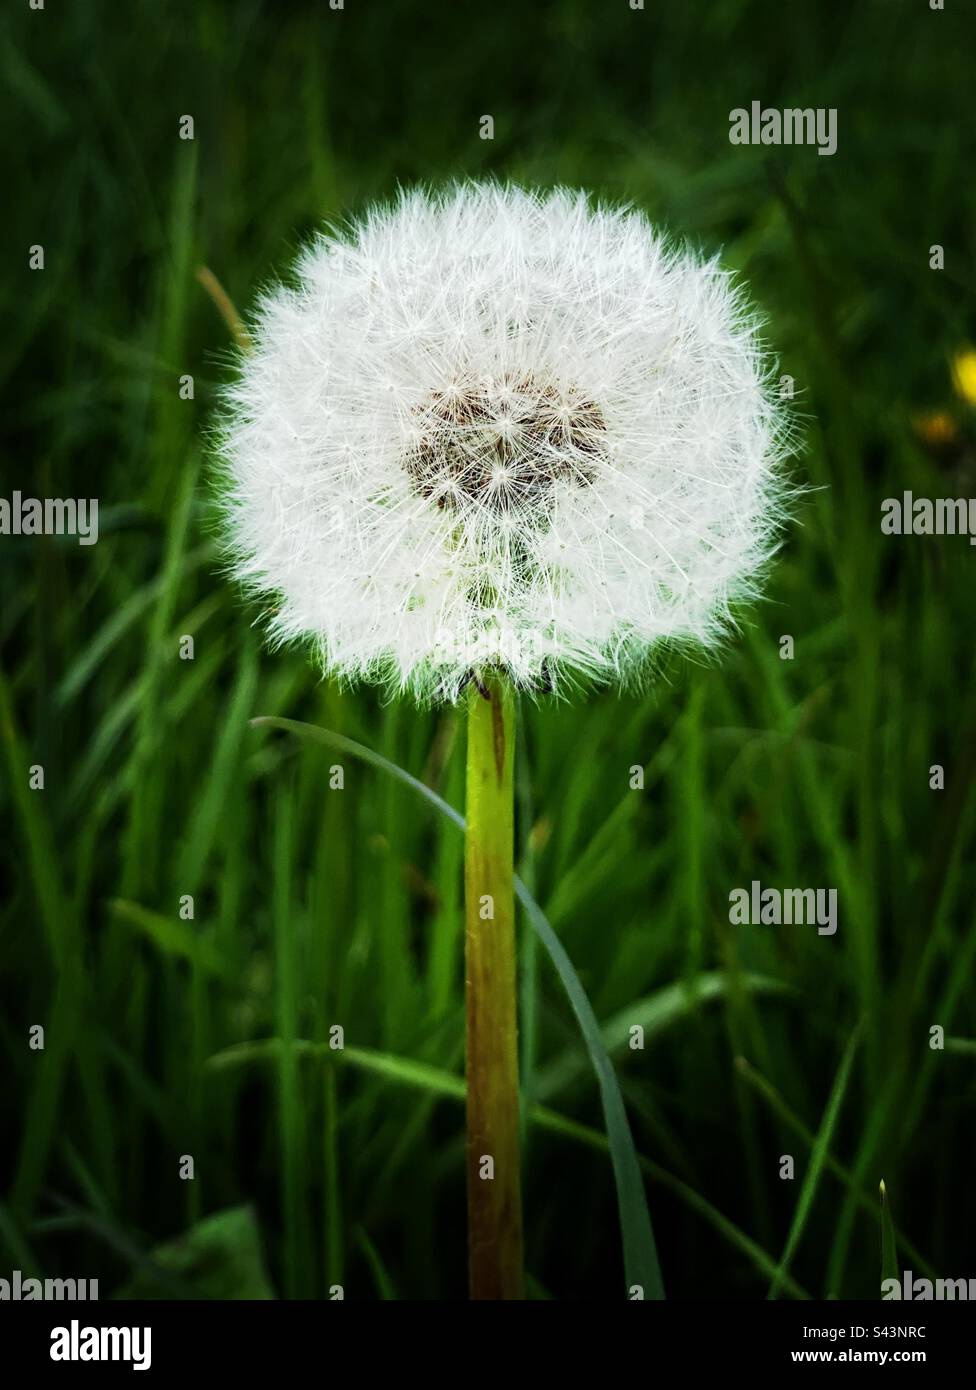 One white dandelion clock growing in grass Stock Photo